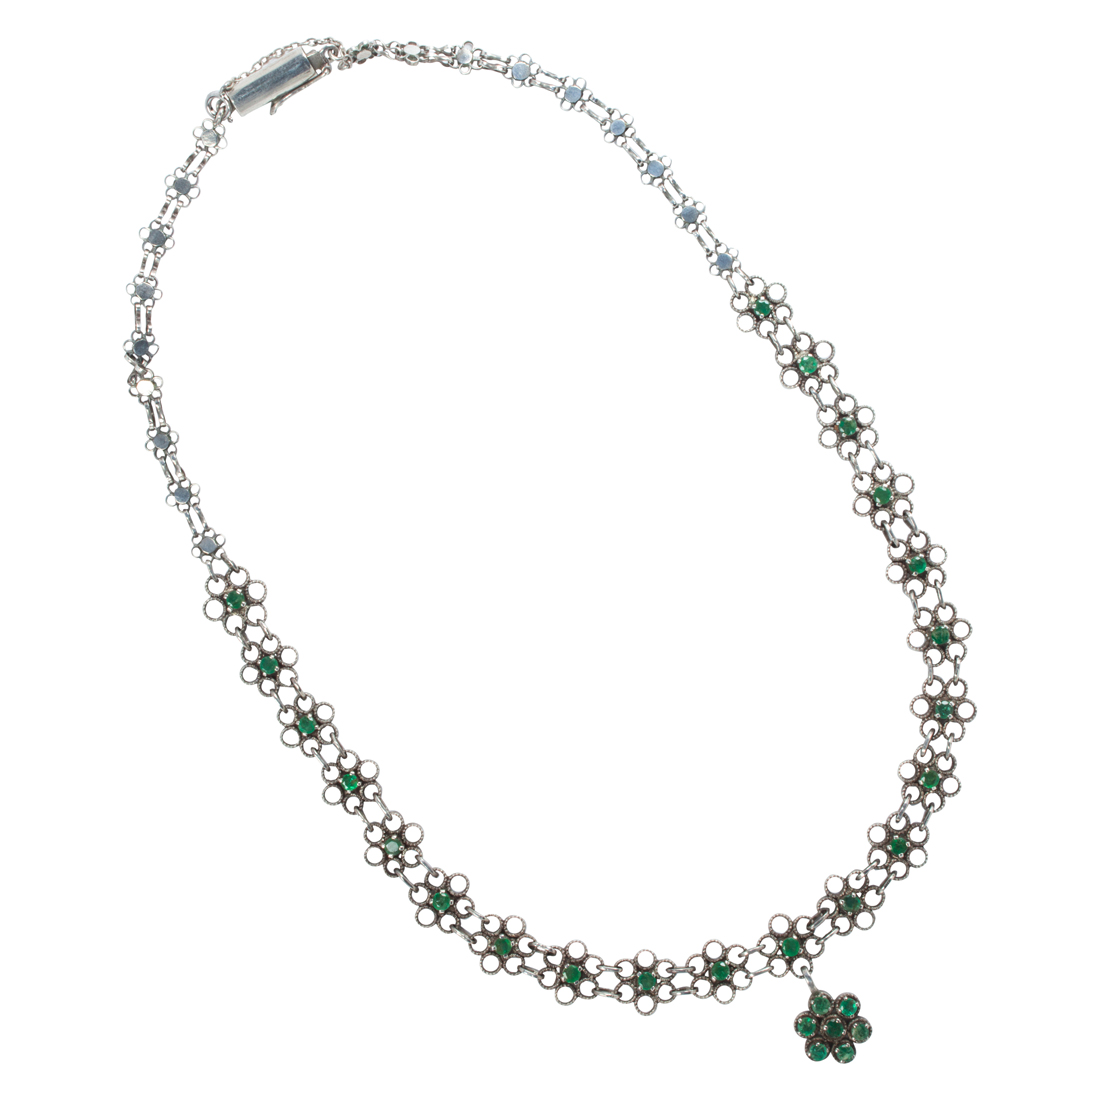 AN EMERALD AND SILVER NECKLACE